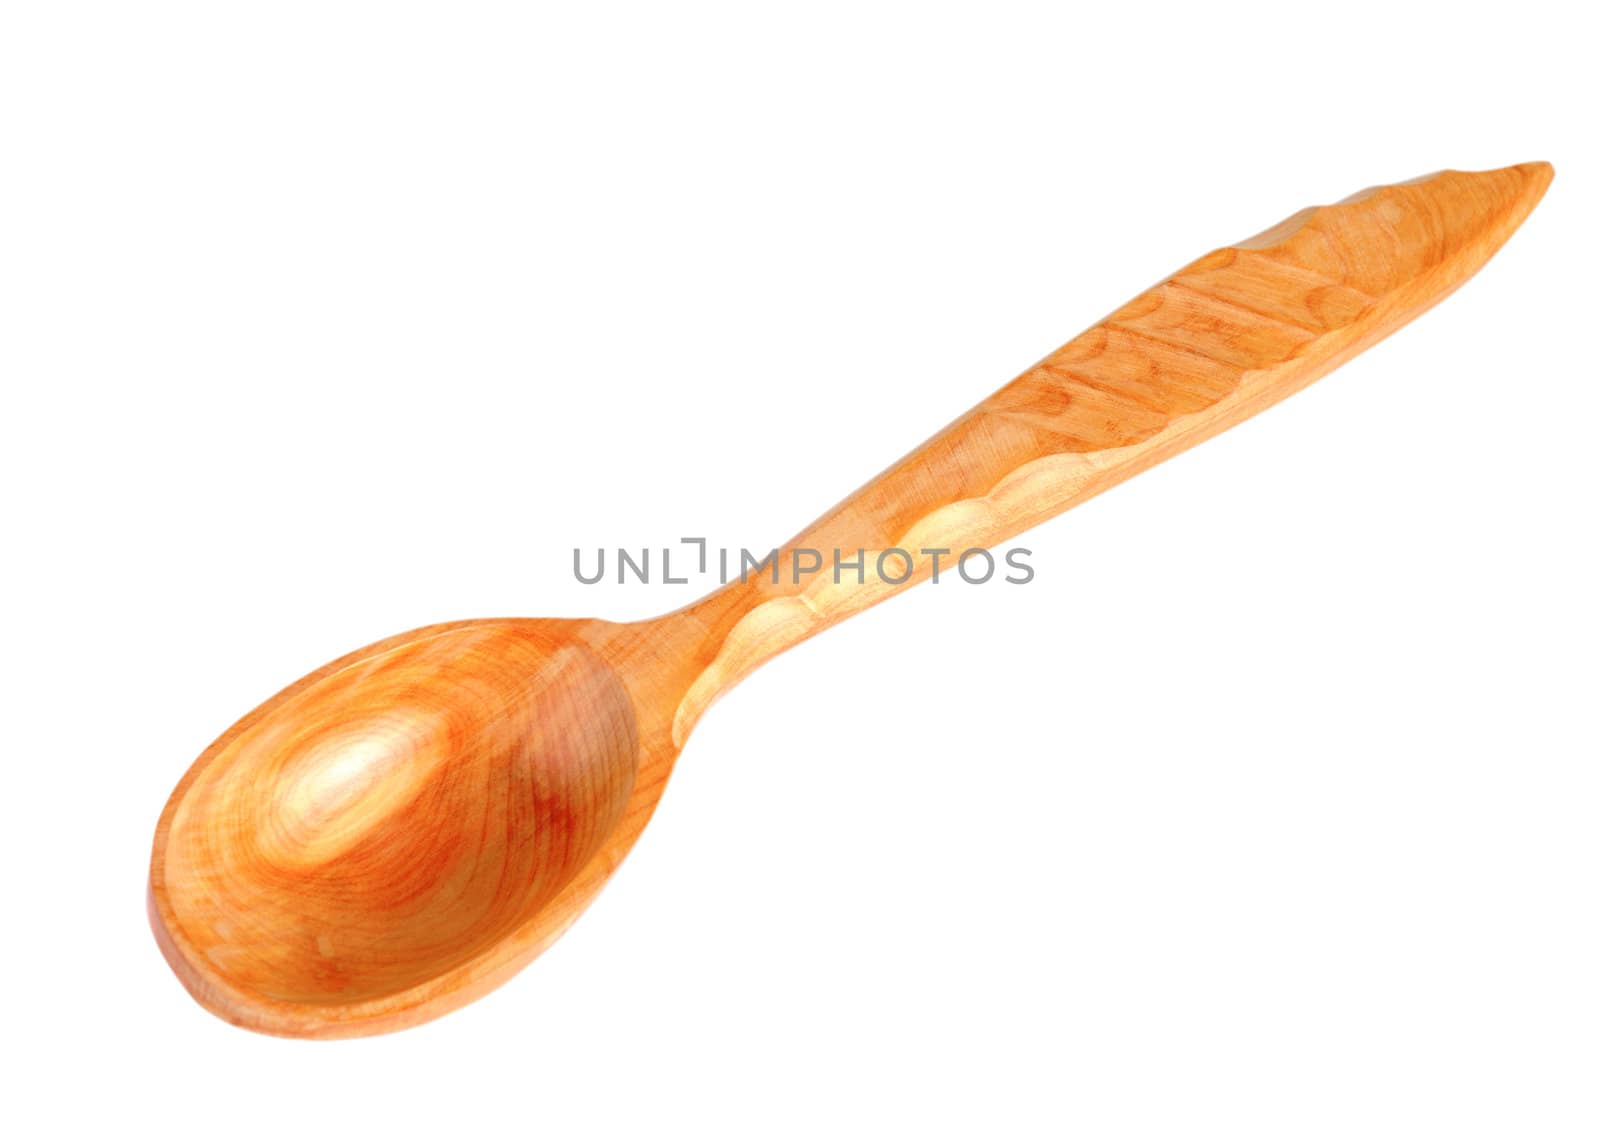 Wooden spoon on white background with clipping path